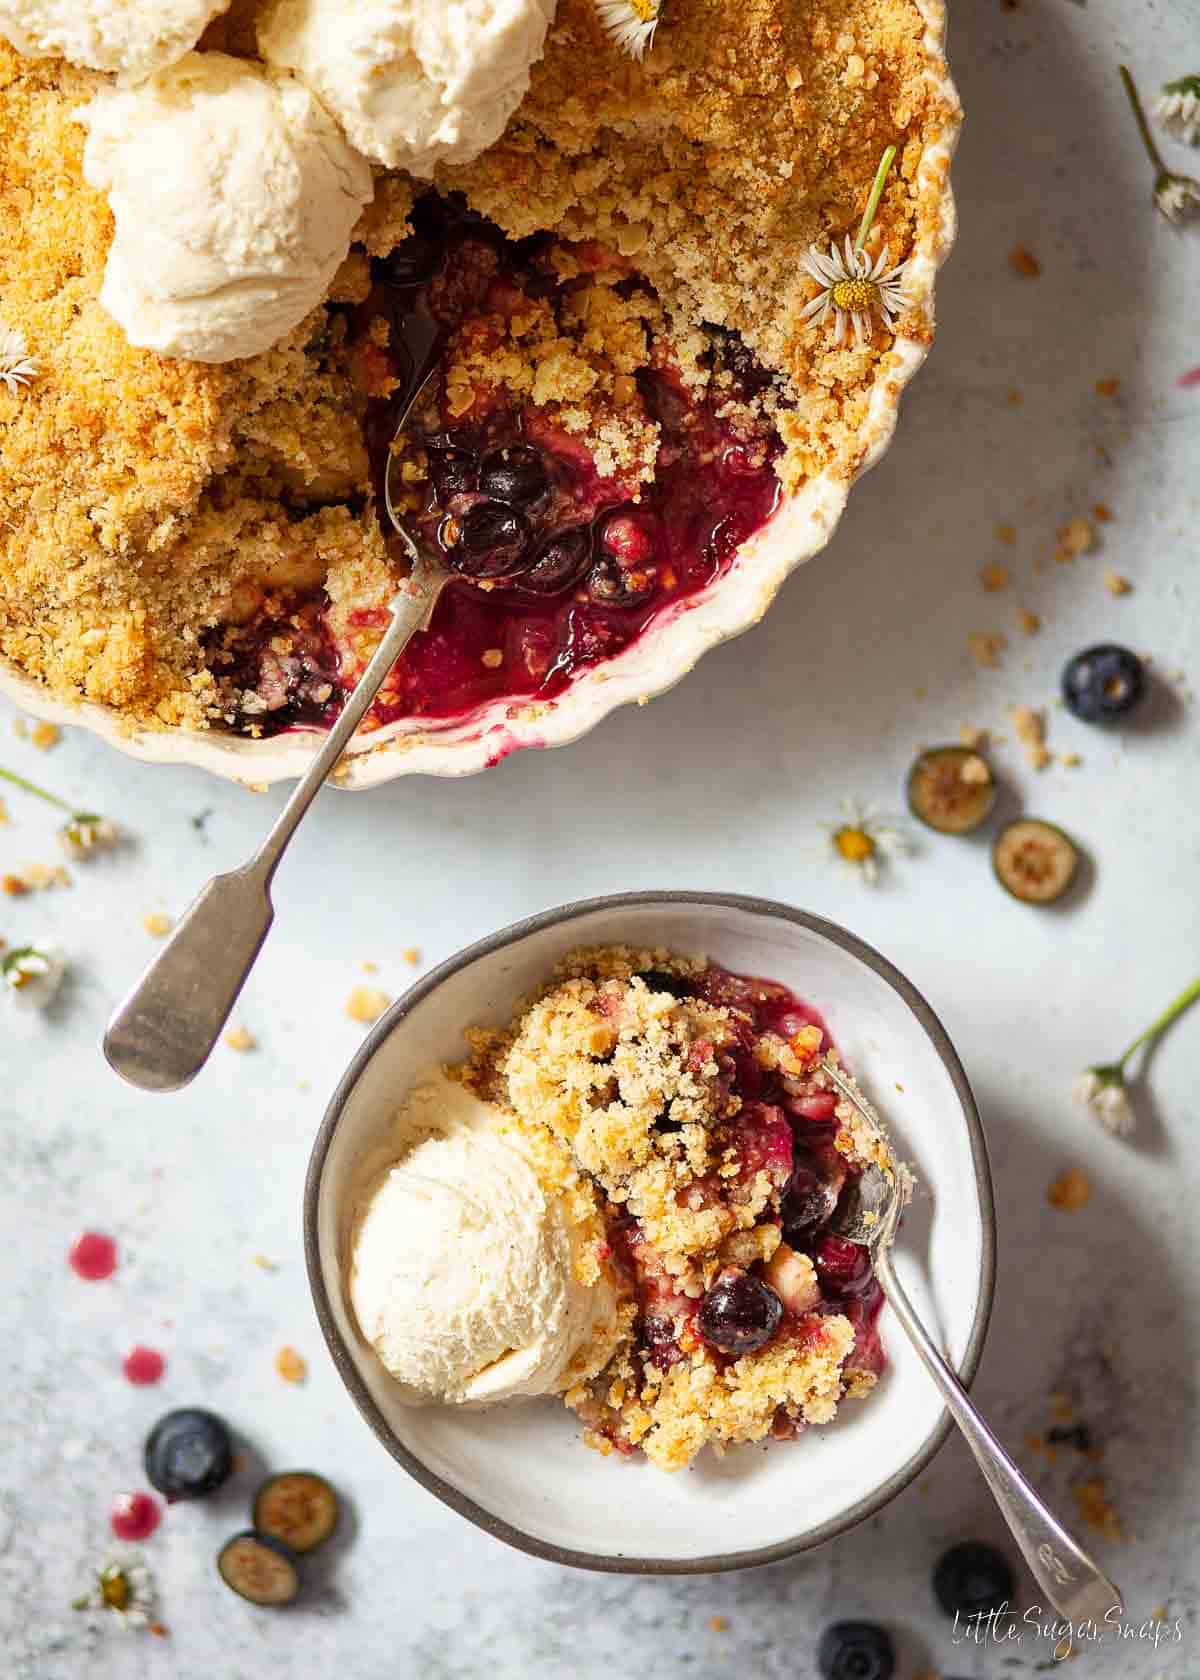 Apple and blueberry crumble being served in a bowl with ice cream.